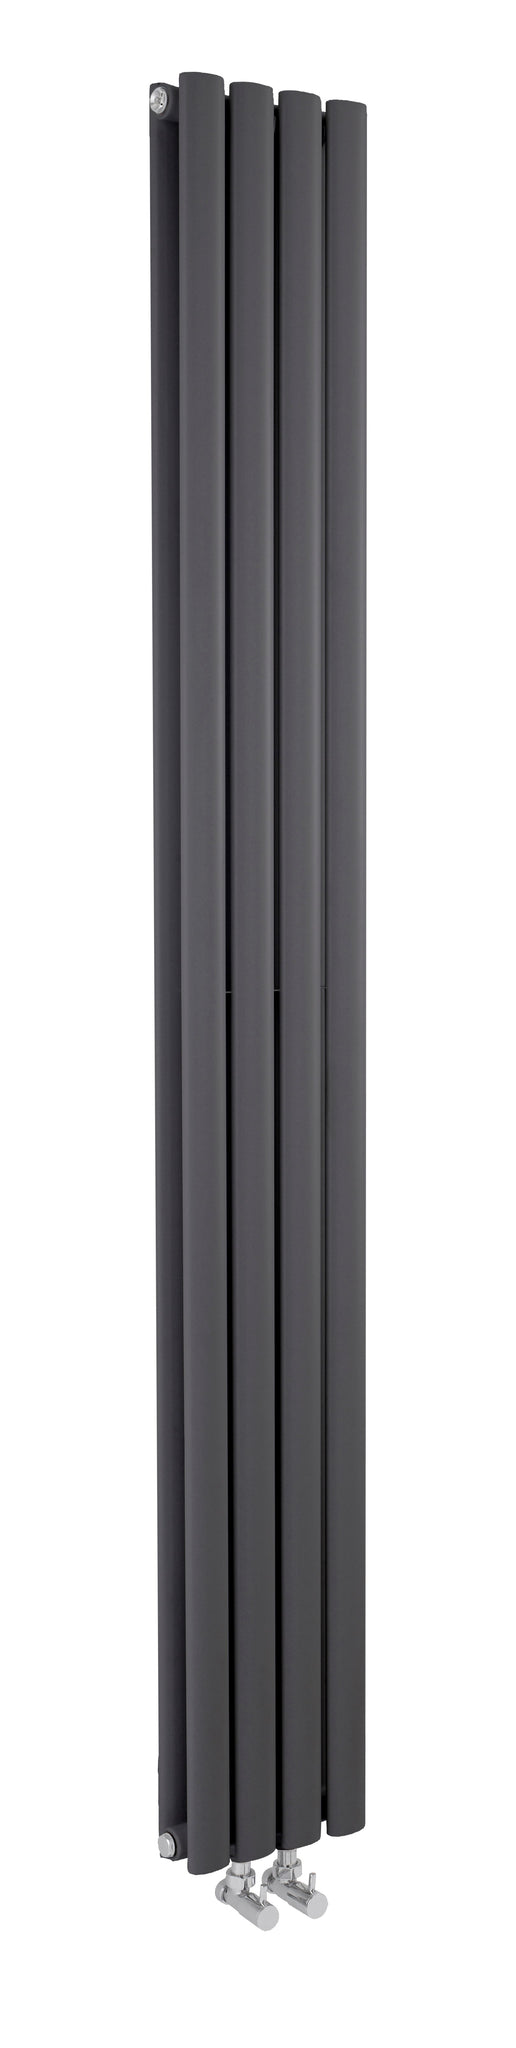 Revive Cloakroom Radiator Anthracite